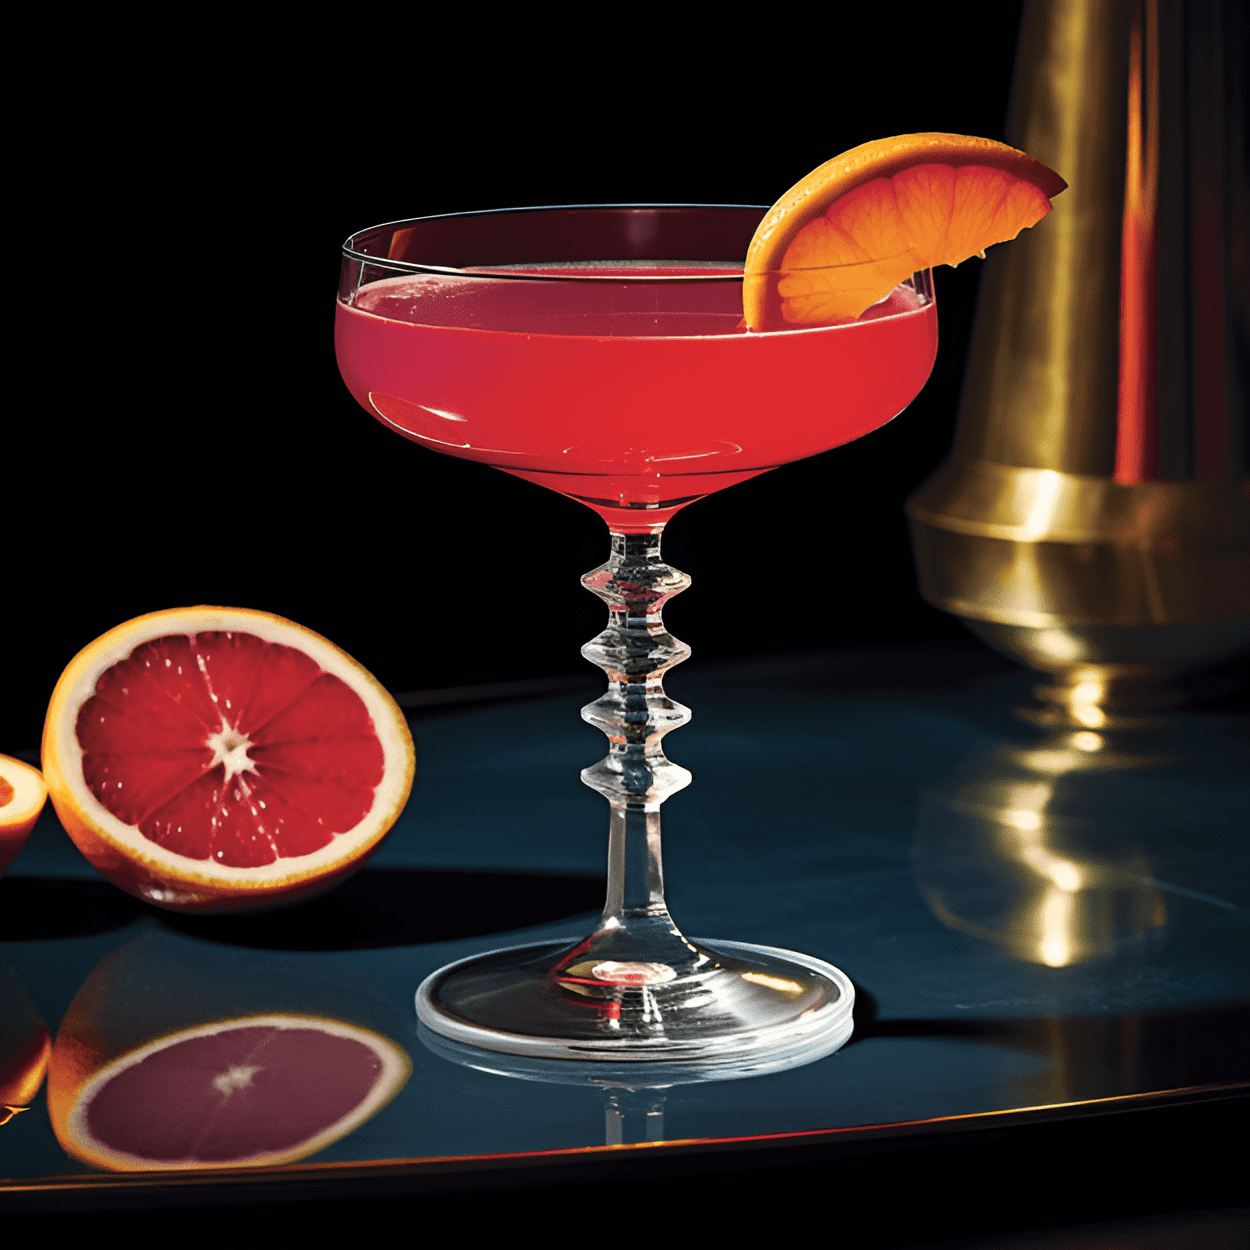 Blood Orange Aviation Cocktail Recipe - The Blood Orange Aviation is a delightful blend of sweet, sour, and slightly bitter flavors. The blood orange juice gives it a unique, tangy sweetness, while the gin adds a hint of bitterness. The maraschino liqueur and crème de violette add a subtle sweetness and floral notes, balancing out the sourness of the lemon juice.